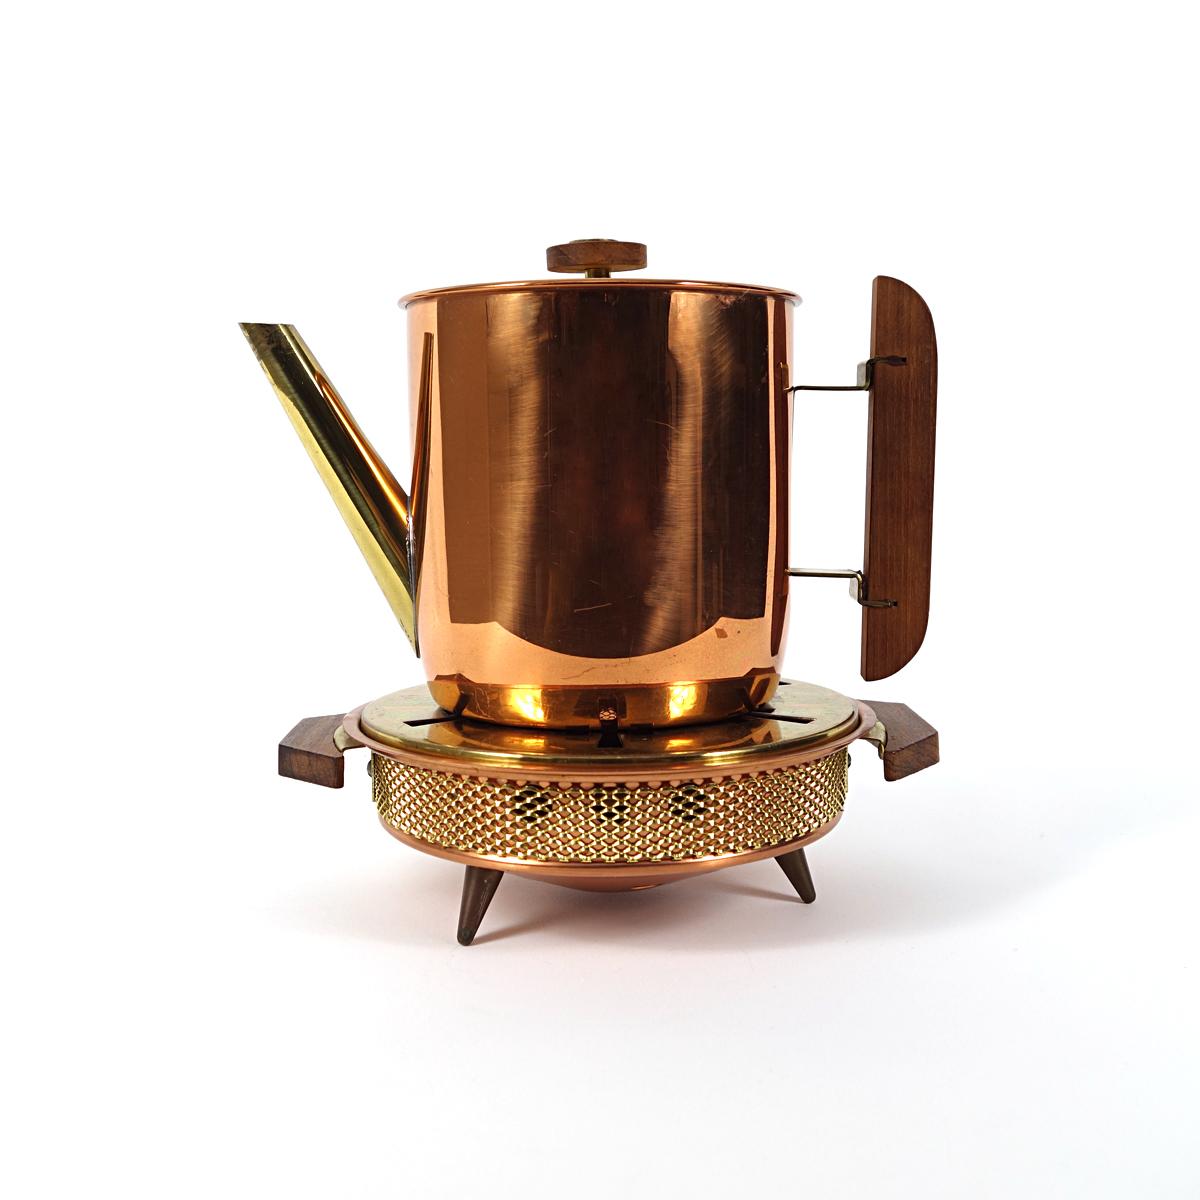 20th Century Art Deco Copper Teapot with Wood Lid and Handle and Matching Tealight For Sale